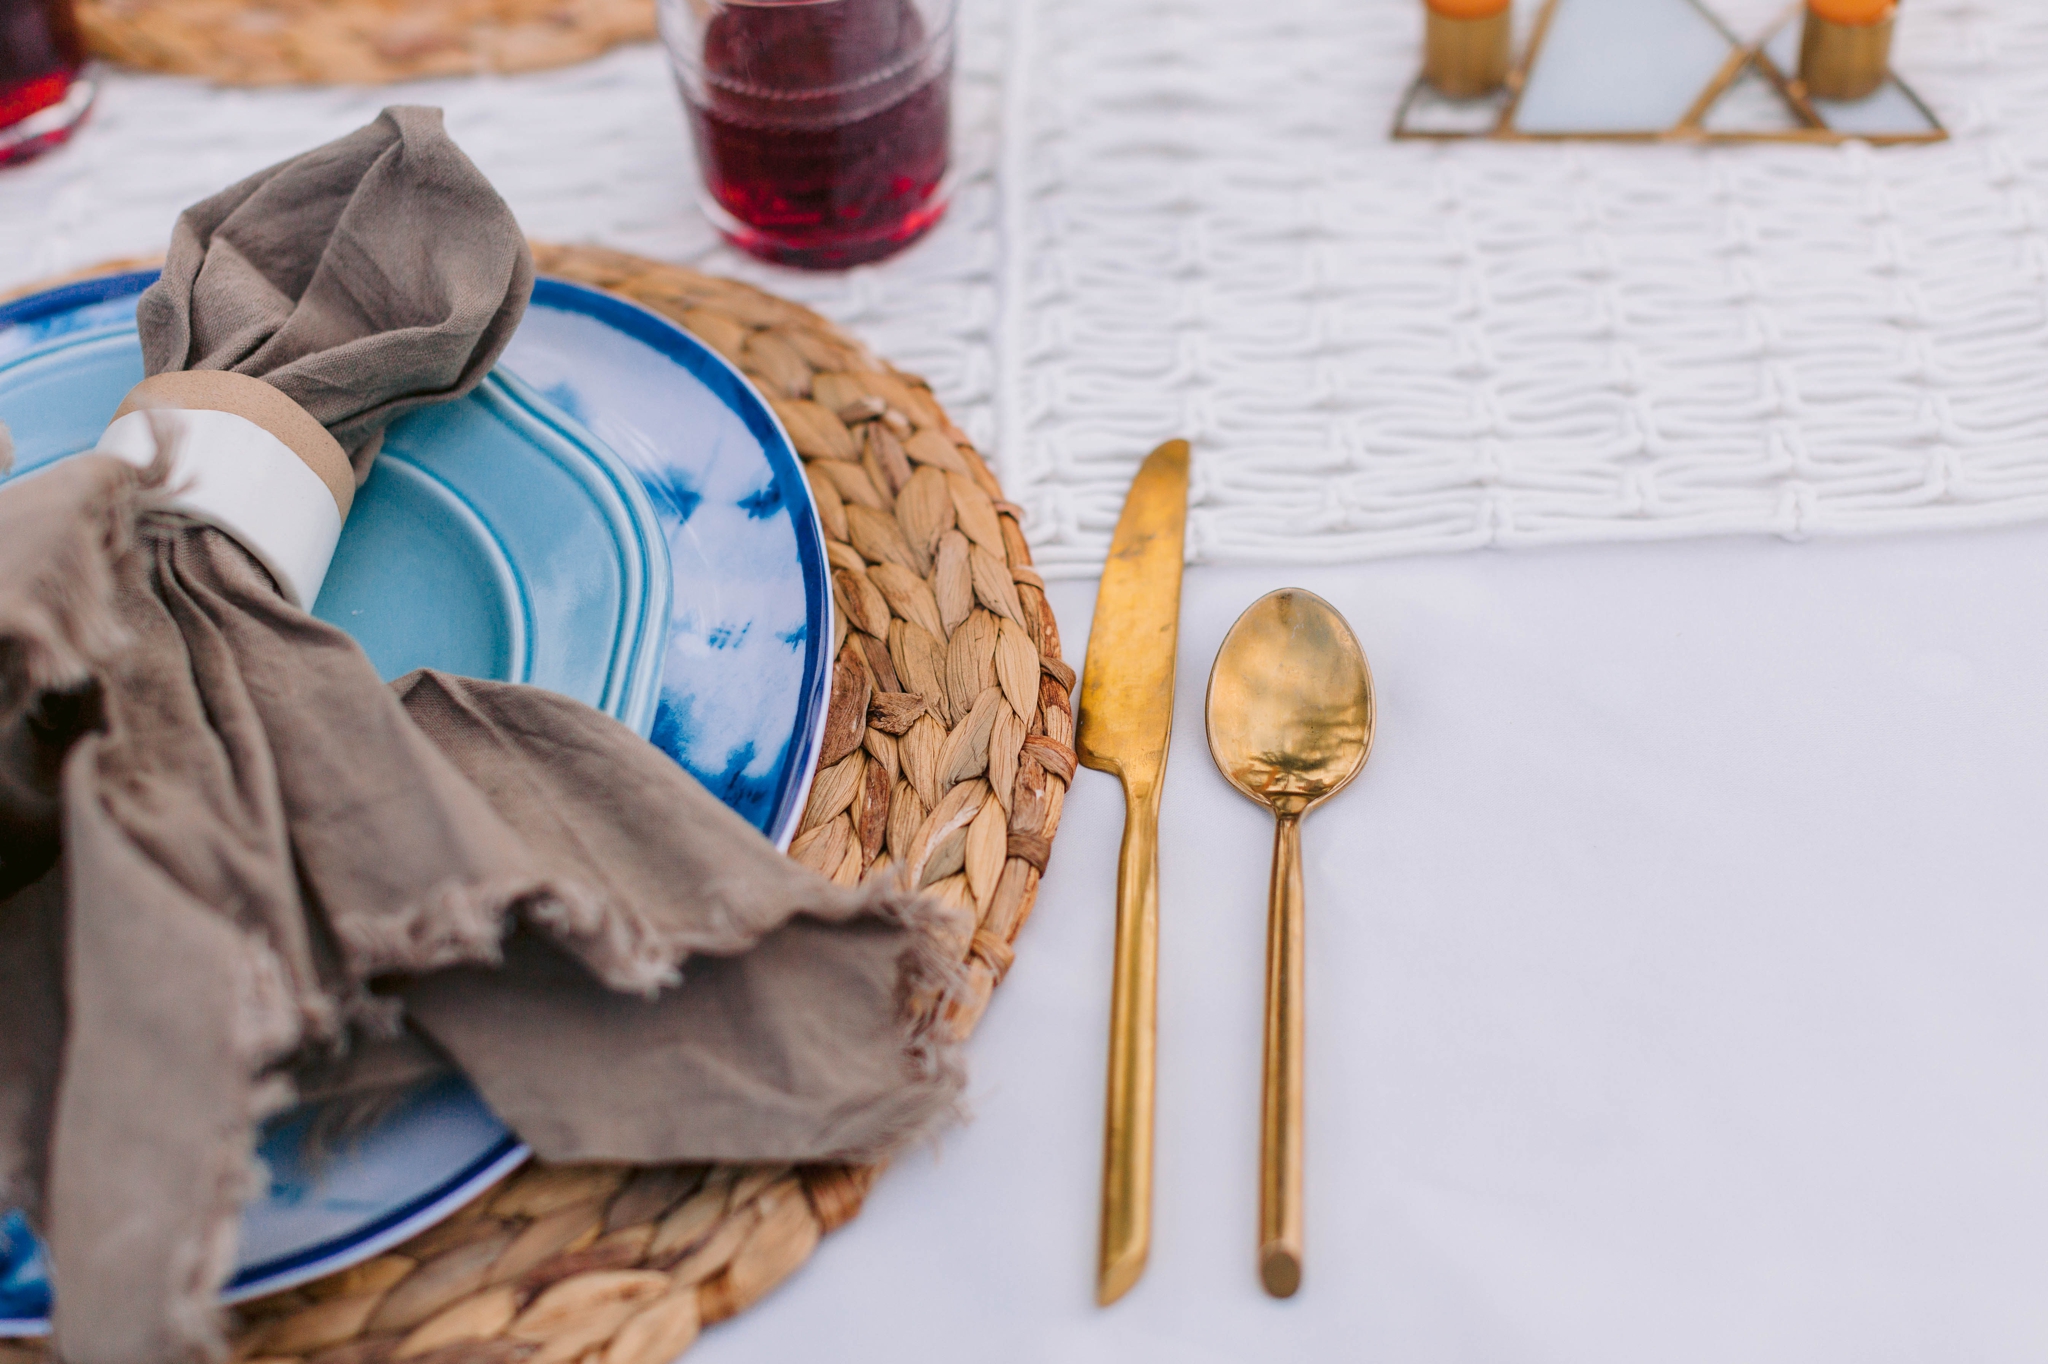 Reception table scape with blue plates and gold flatware - Ana + Elijah - Wedding at Loulu Palm in Haleiwa, HI - Oahu Hawaii Wedding Photographer 